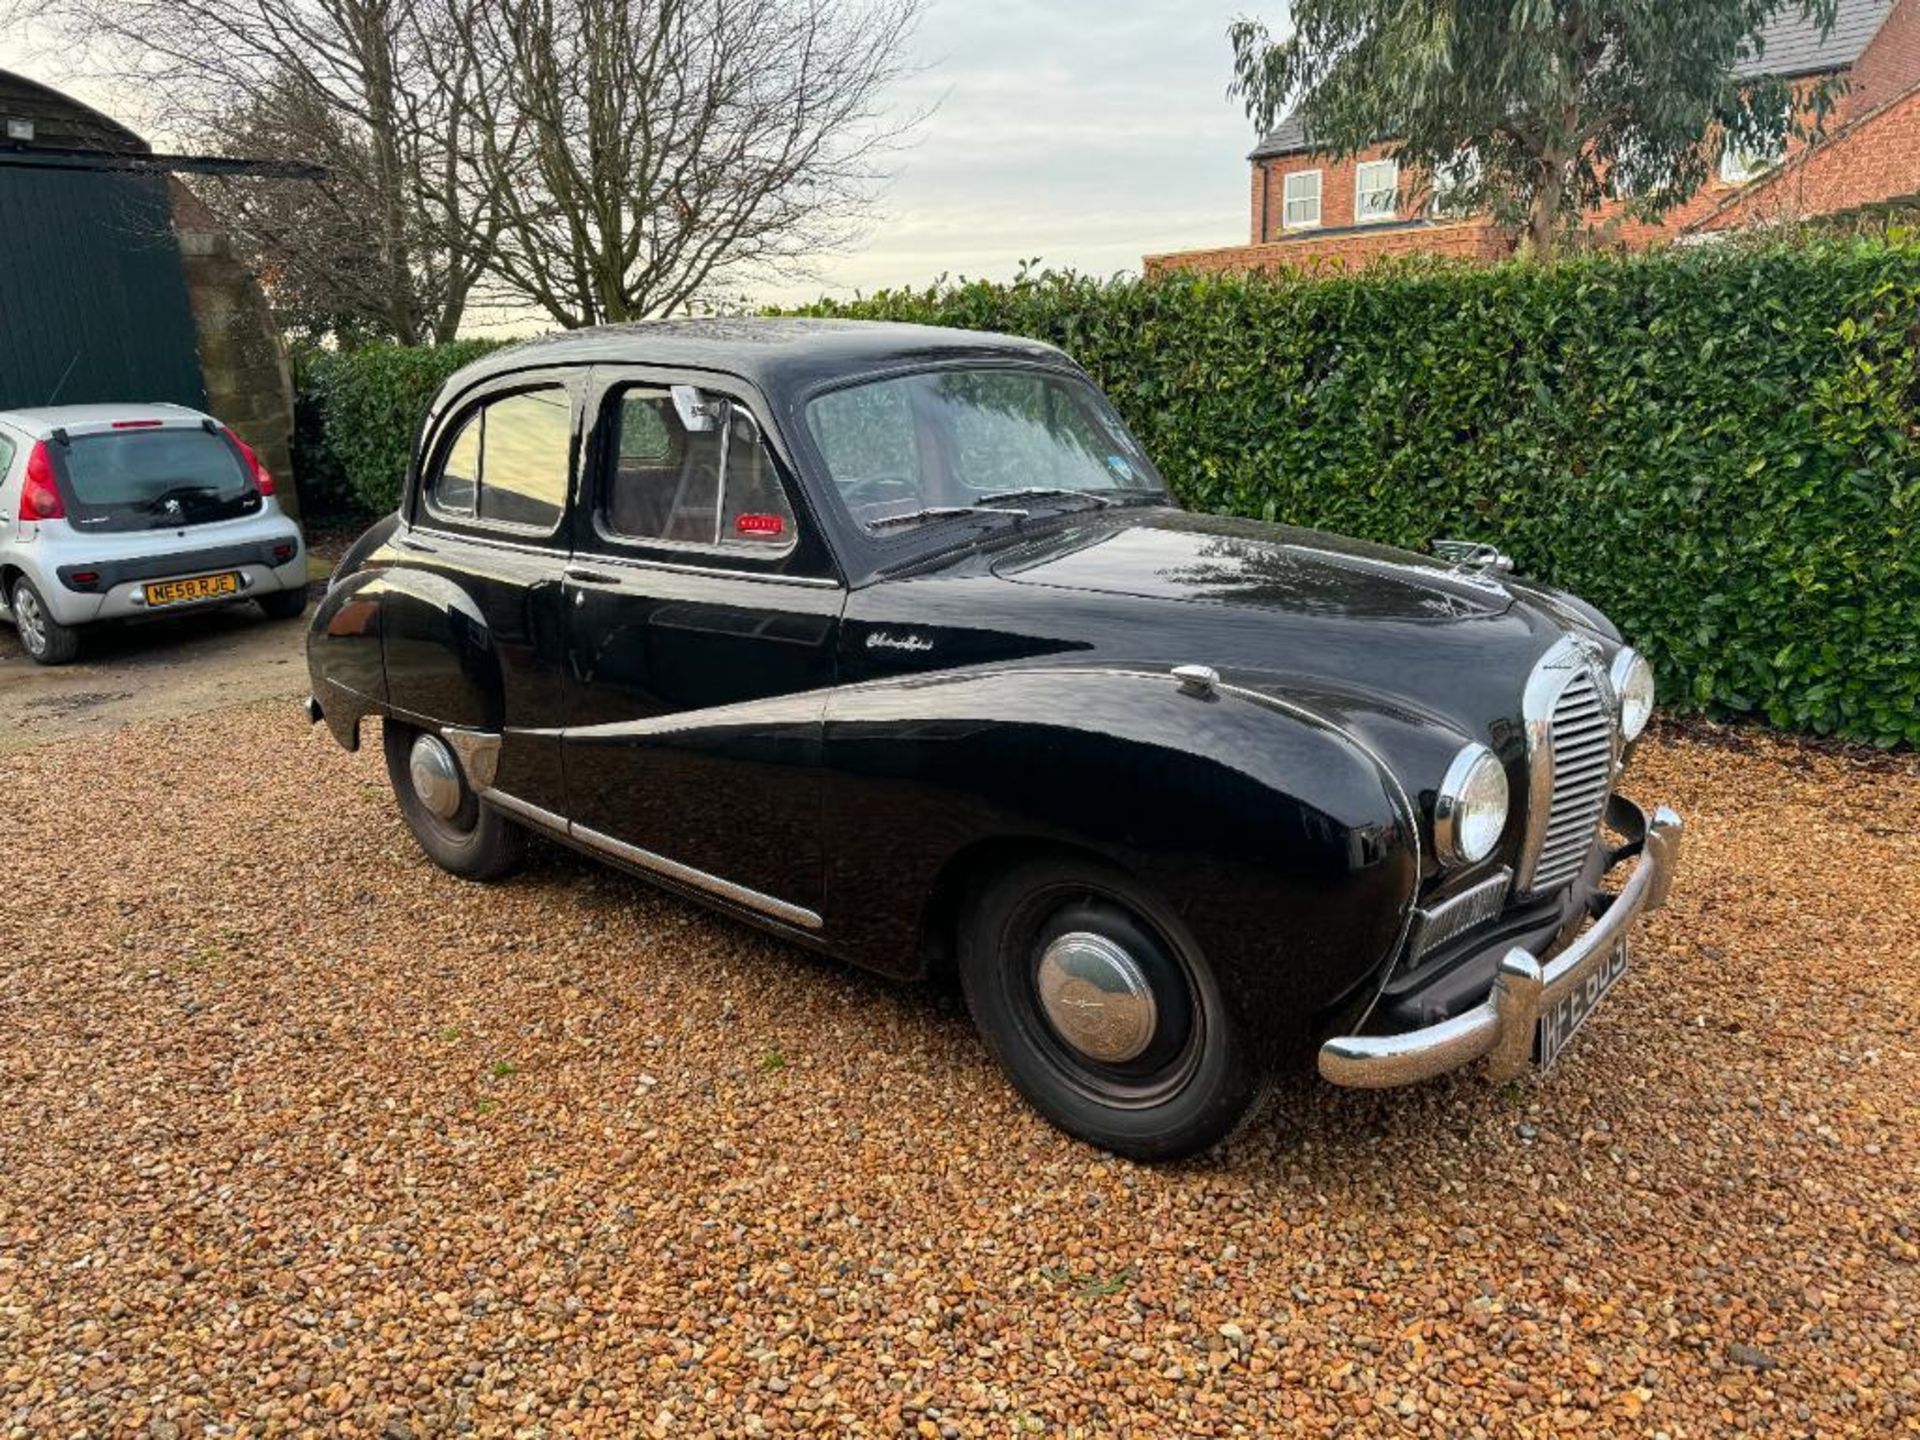 1954 Austin A40 Somerset black saloon car with 1200cc petrol engine, red leather interior and spare - Image 16 of 24